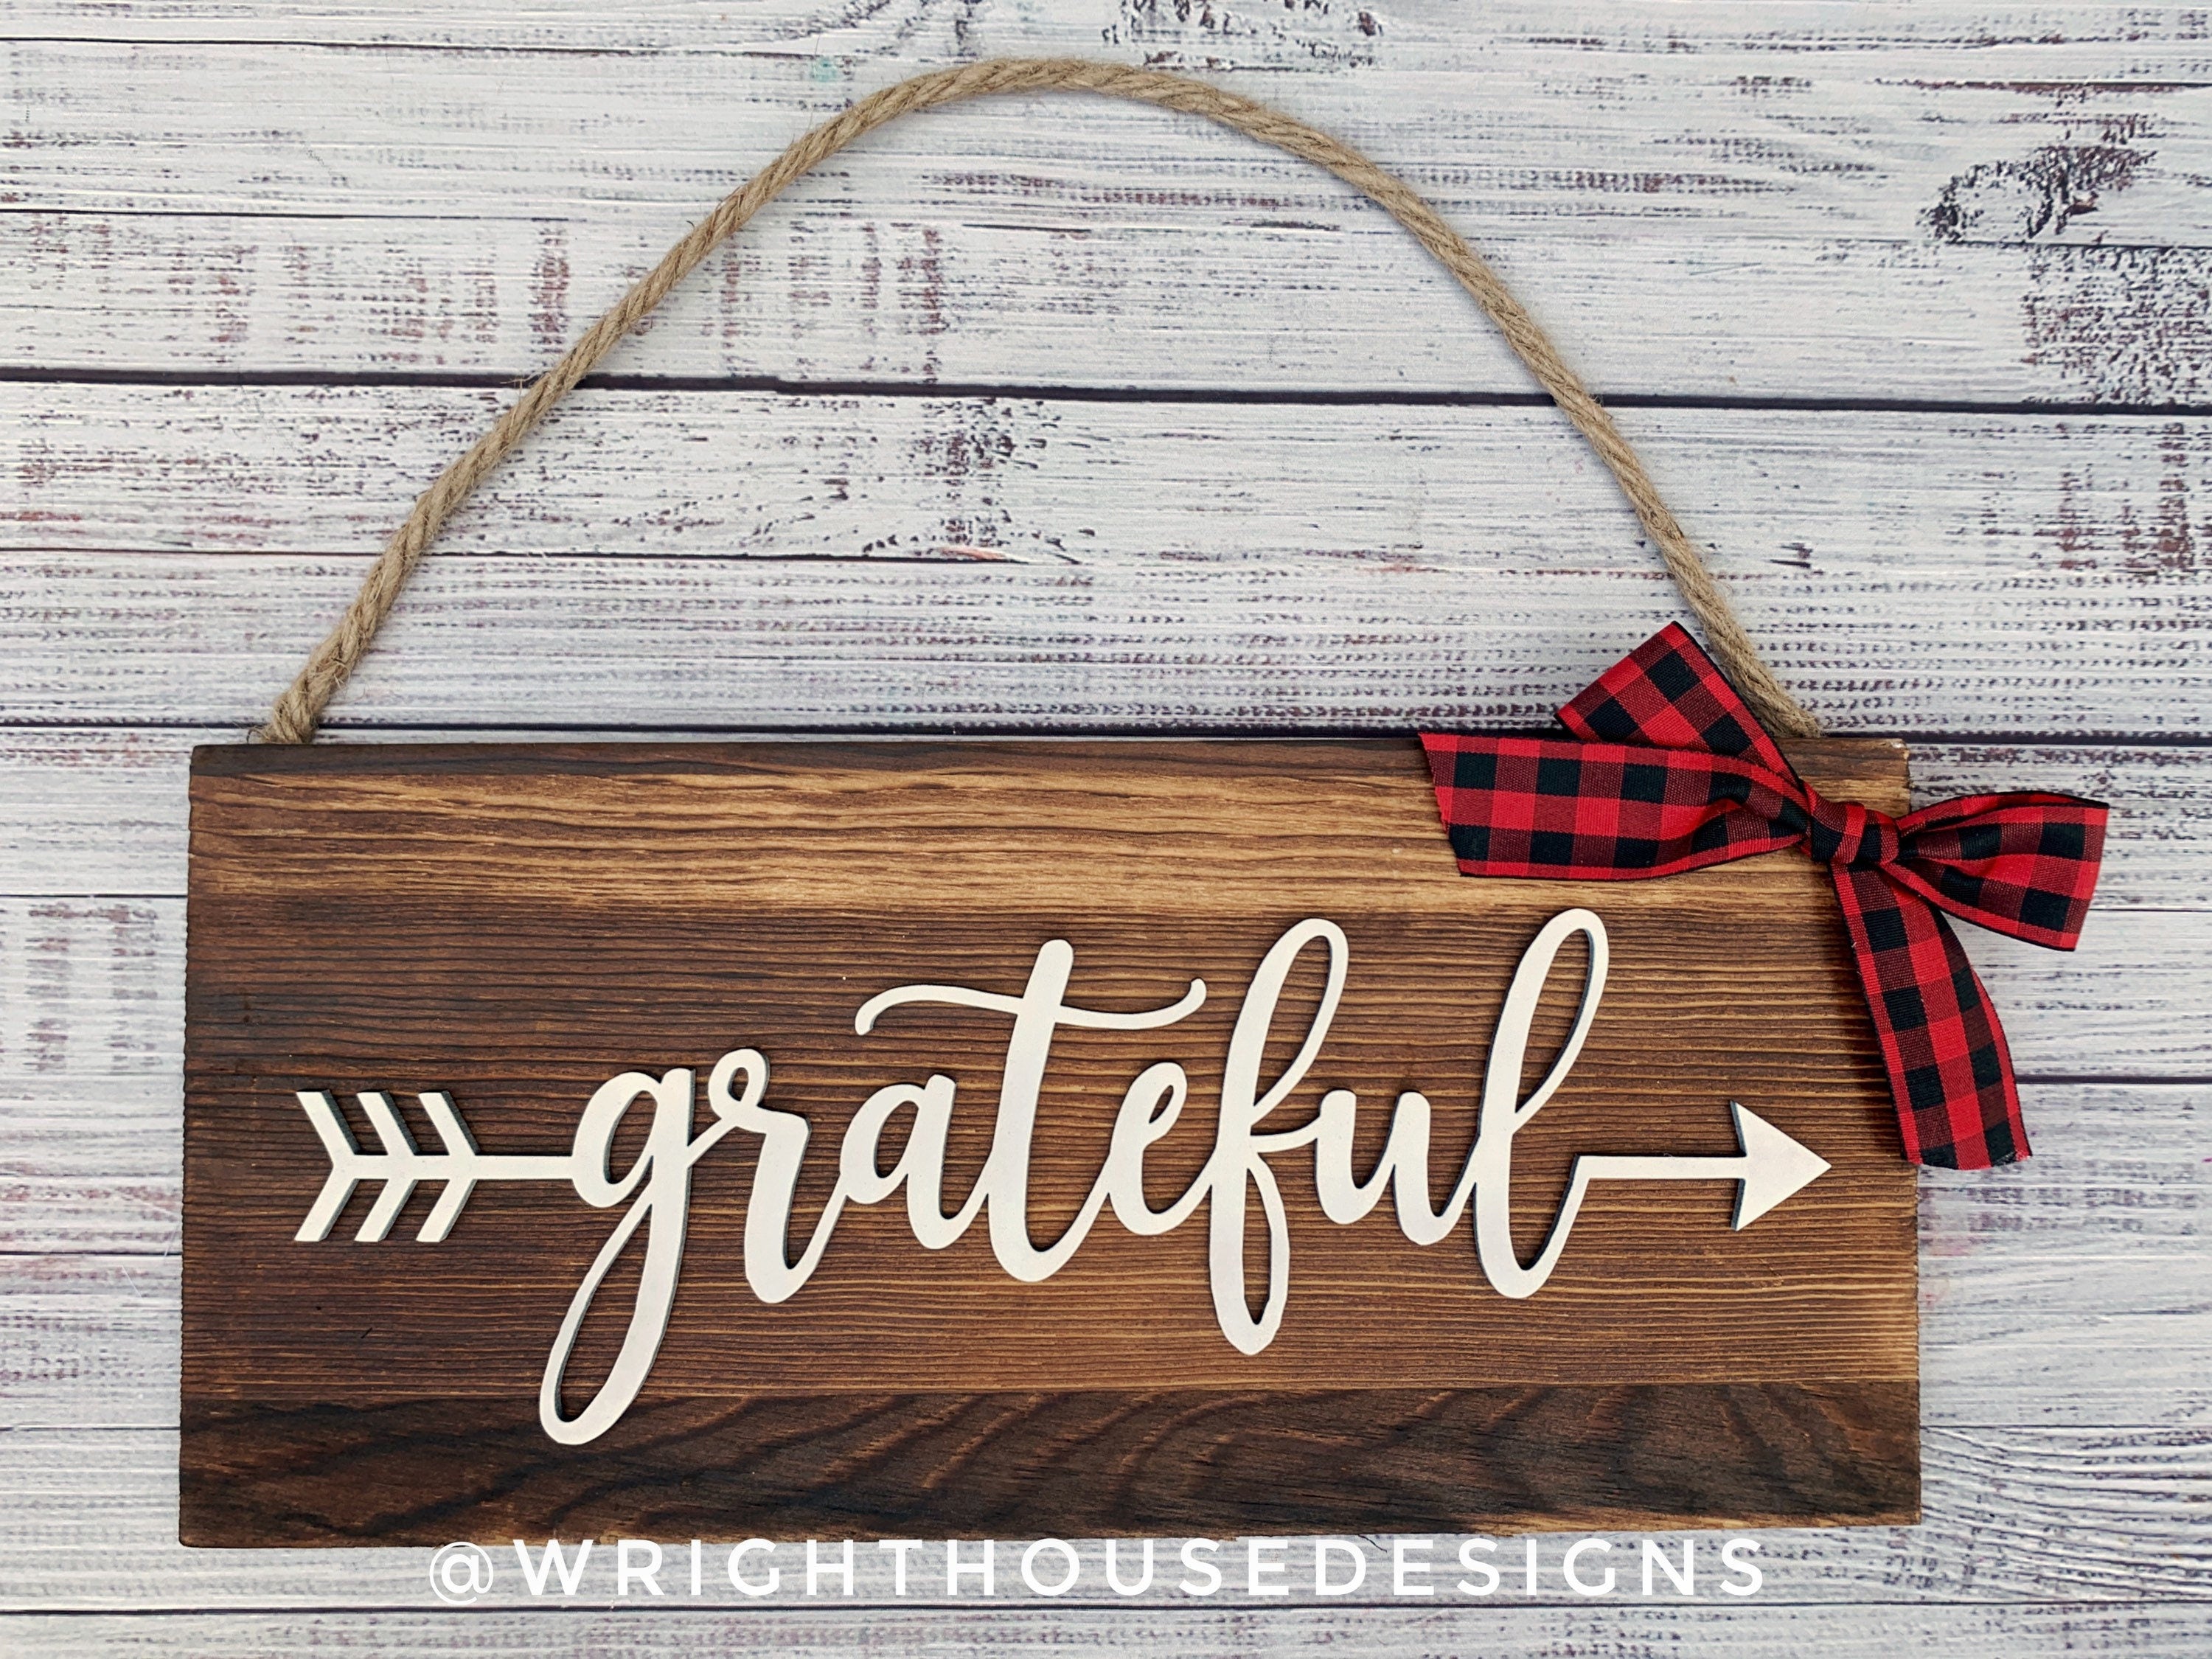 Grateful Arrow Word Art - Rustic Farmhouse - Reclaimed Pallet Plank Board Sign - Wooden Wall Art - Bookshelf Decor and She Shed Signs